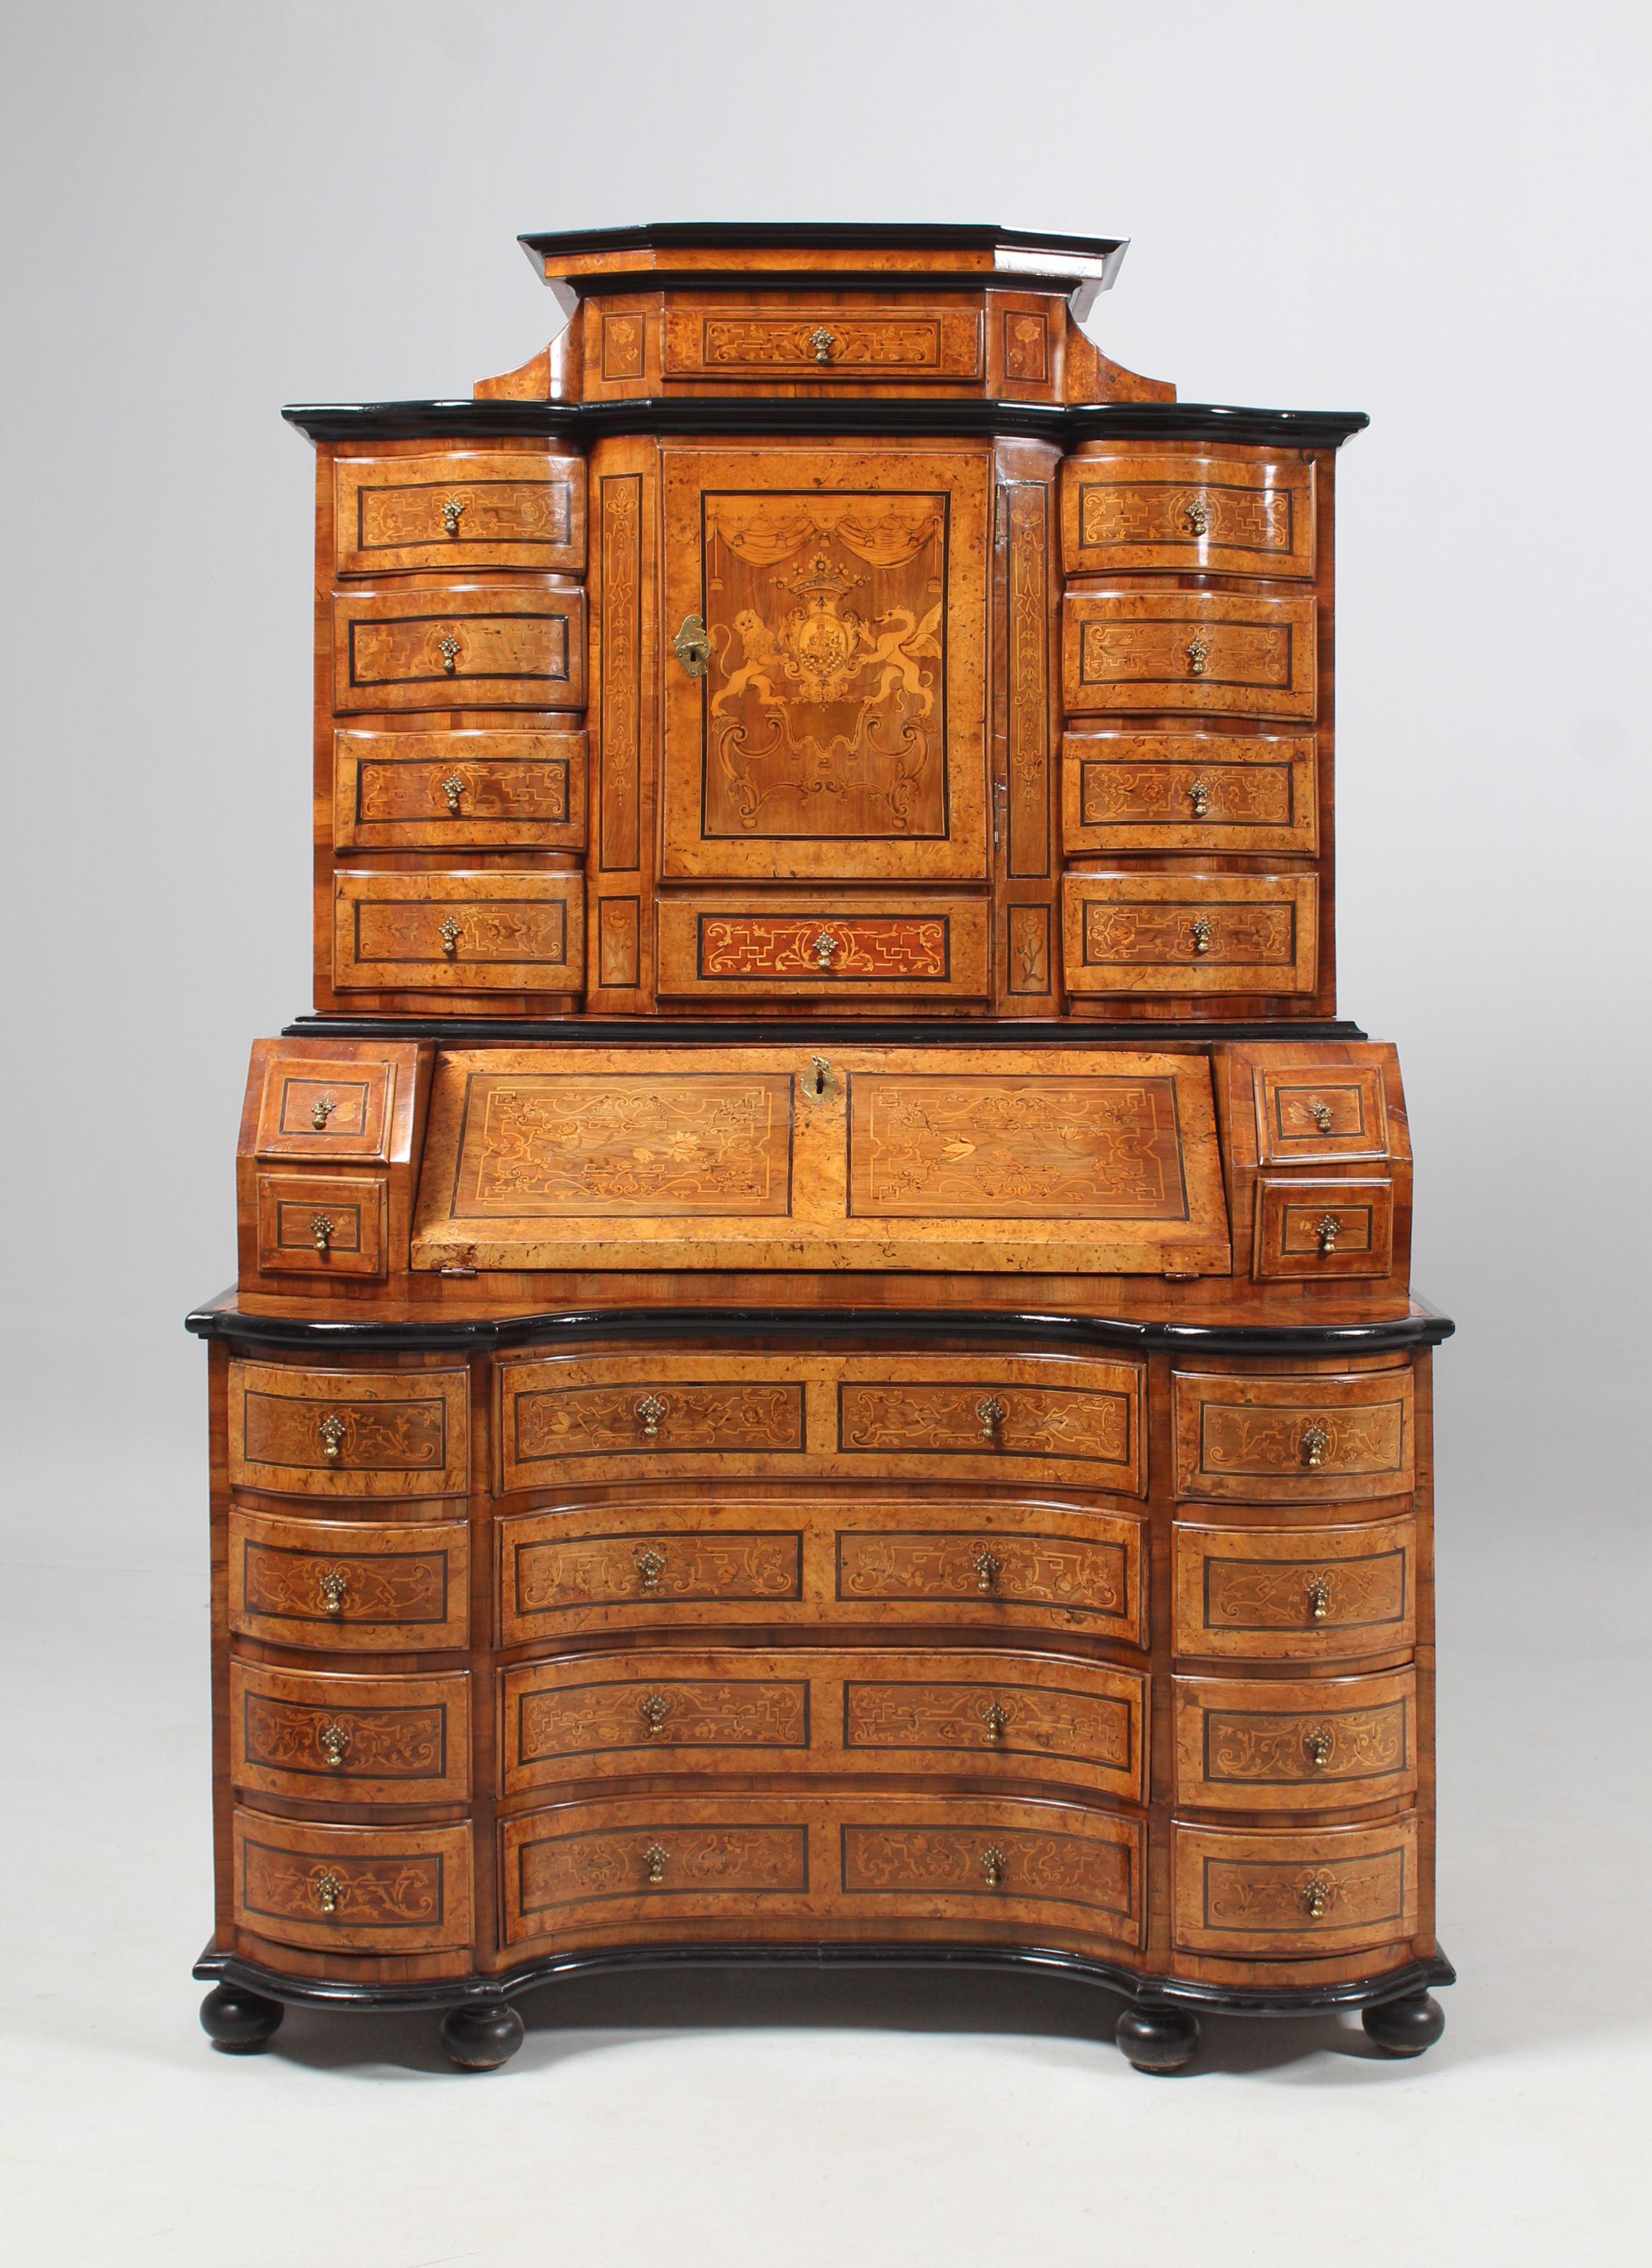 Baroque tabernacle secretary with rich marquetry
Palatinate / Trier
Walnut, birch burl a.o.
Baroque around 1735

Dimensions: H x W x D: 190 x 126 x 79 cm

Description:
Very rare and in best quality manufactured writing cabinet, so called